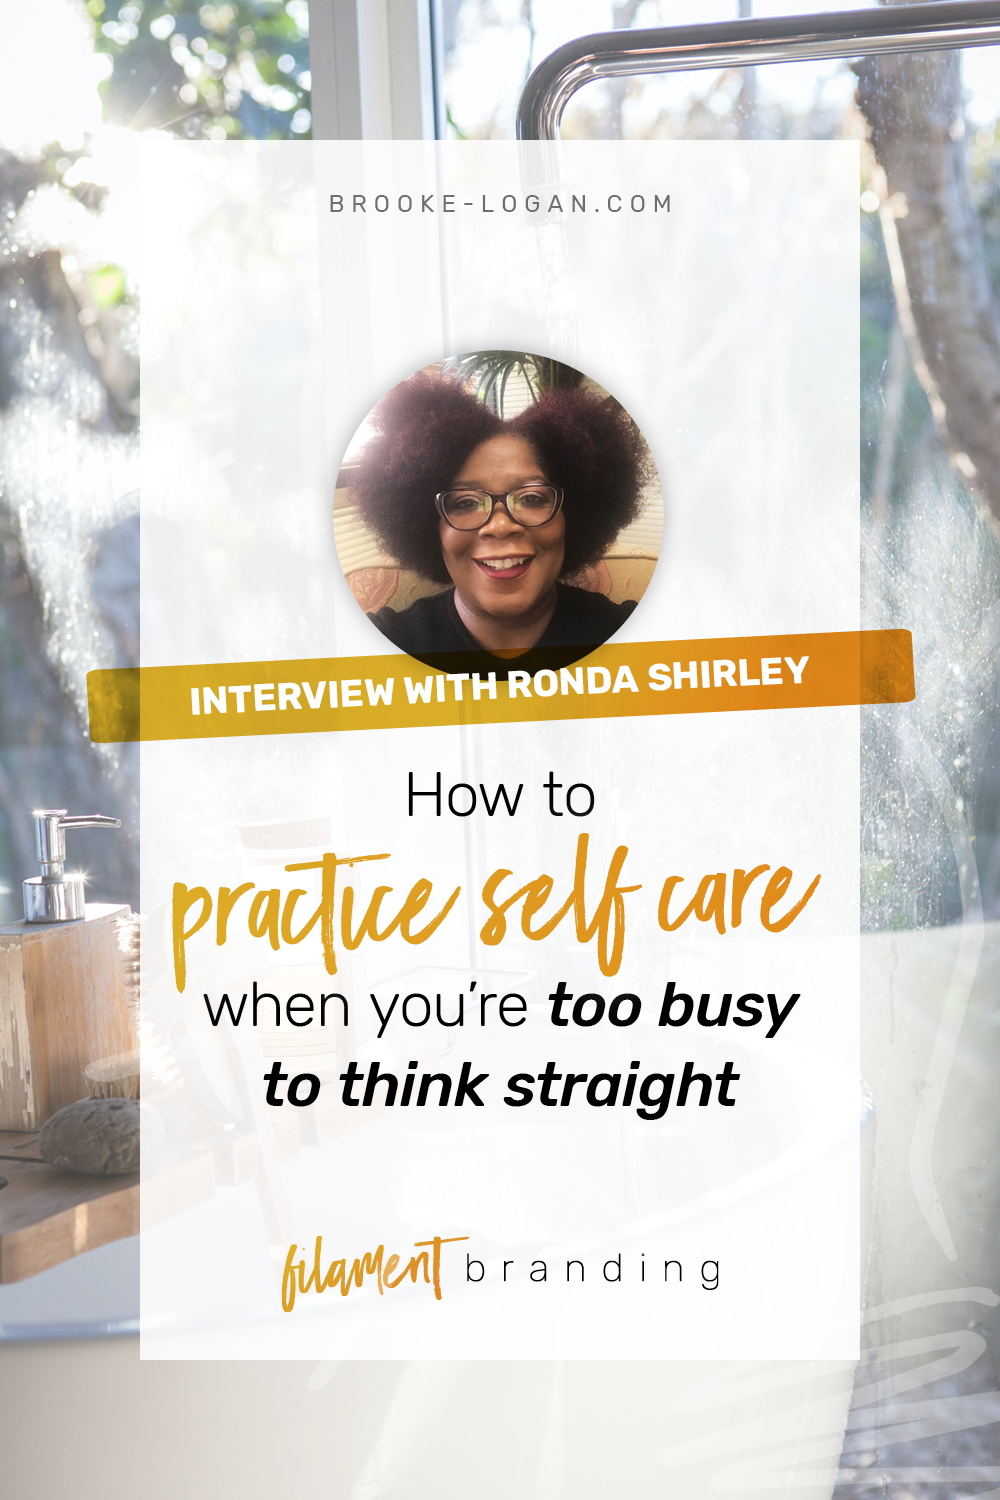 Ep 13: How to practice self care when you’re too busy to think straight with Ronda Shirley